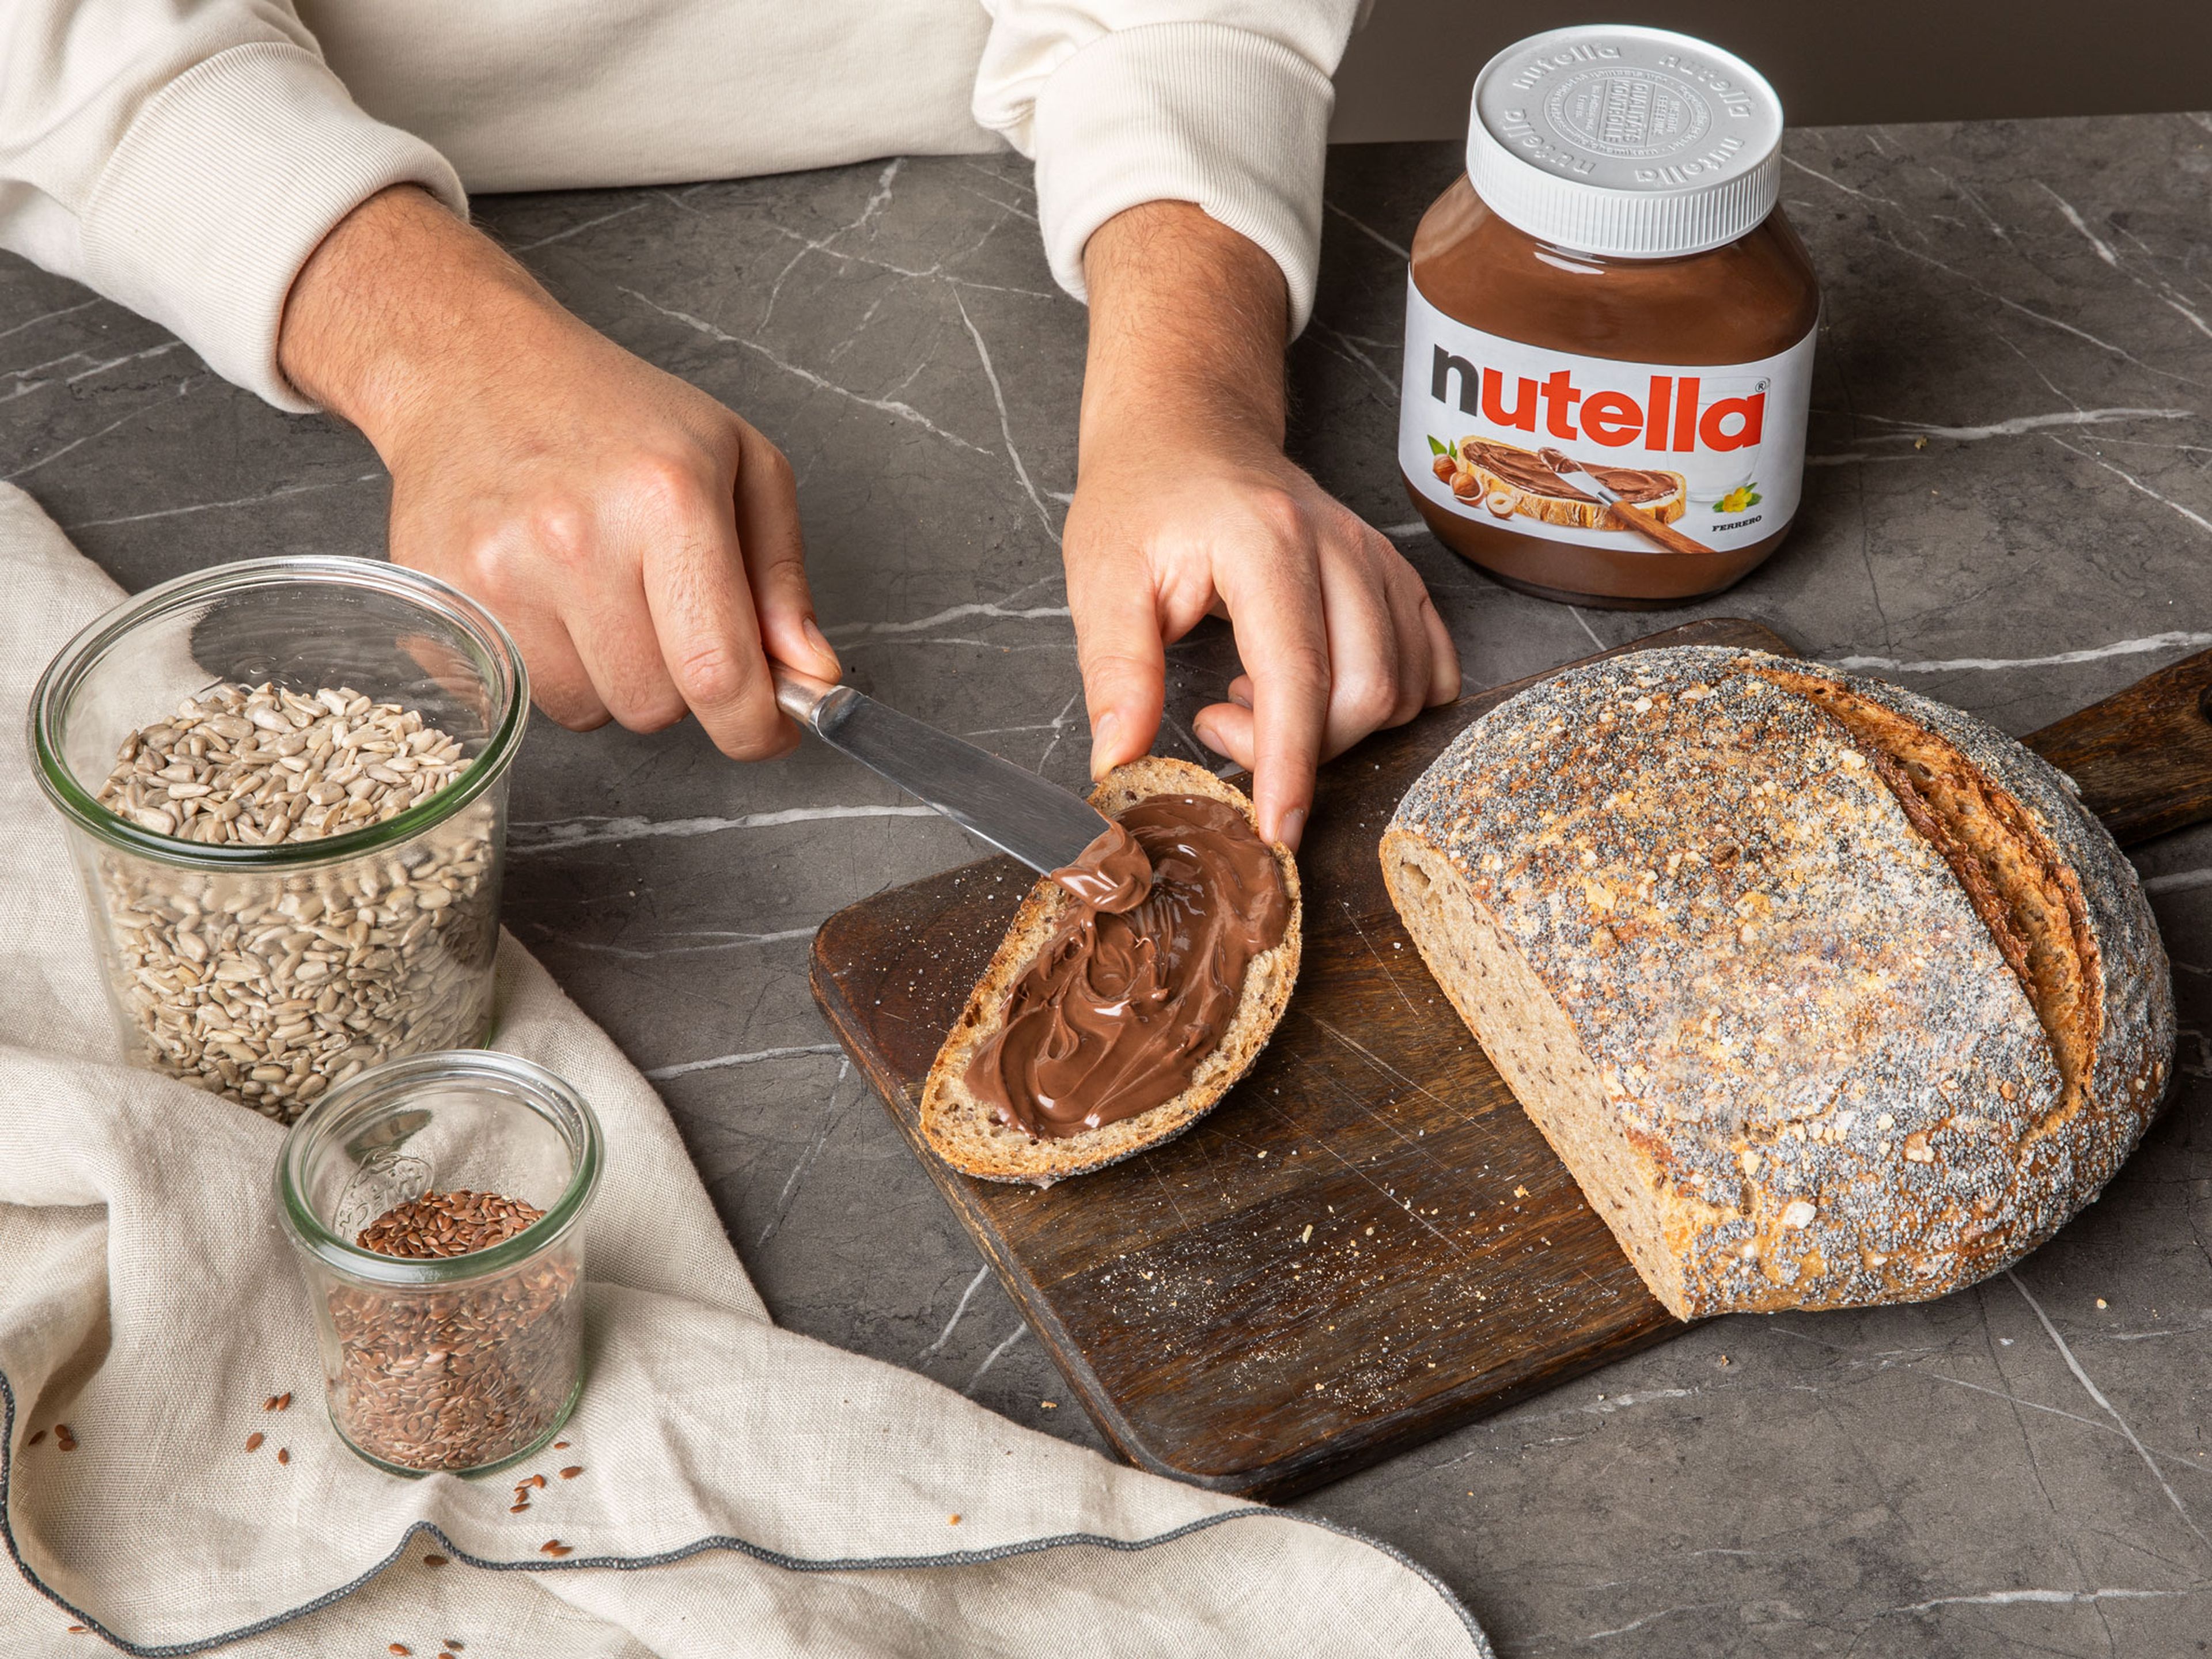 Once completely cooled down, slice the bread and spread with 15 g of nutella® per serving.